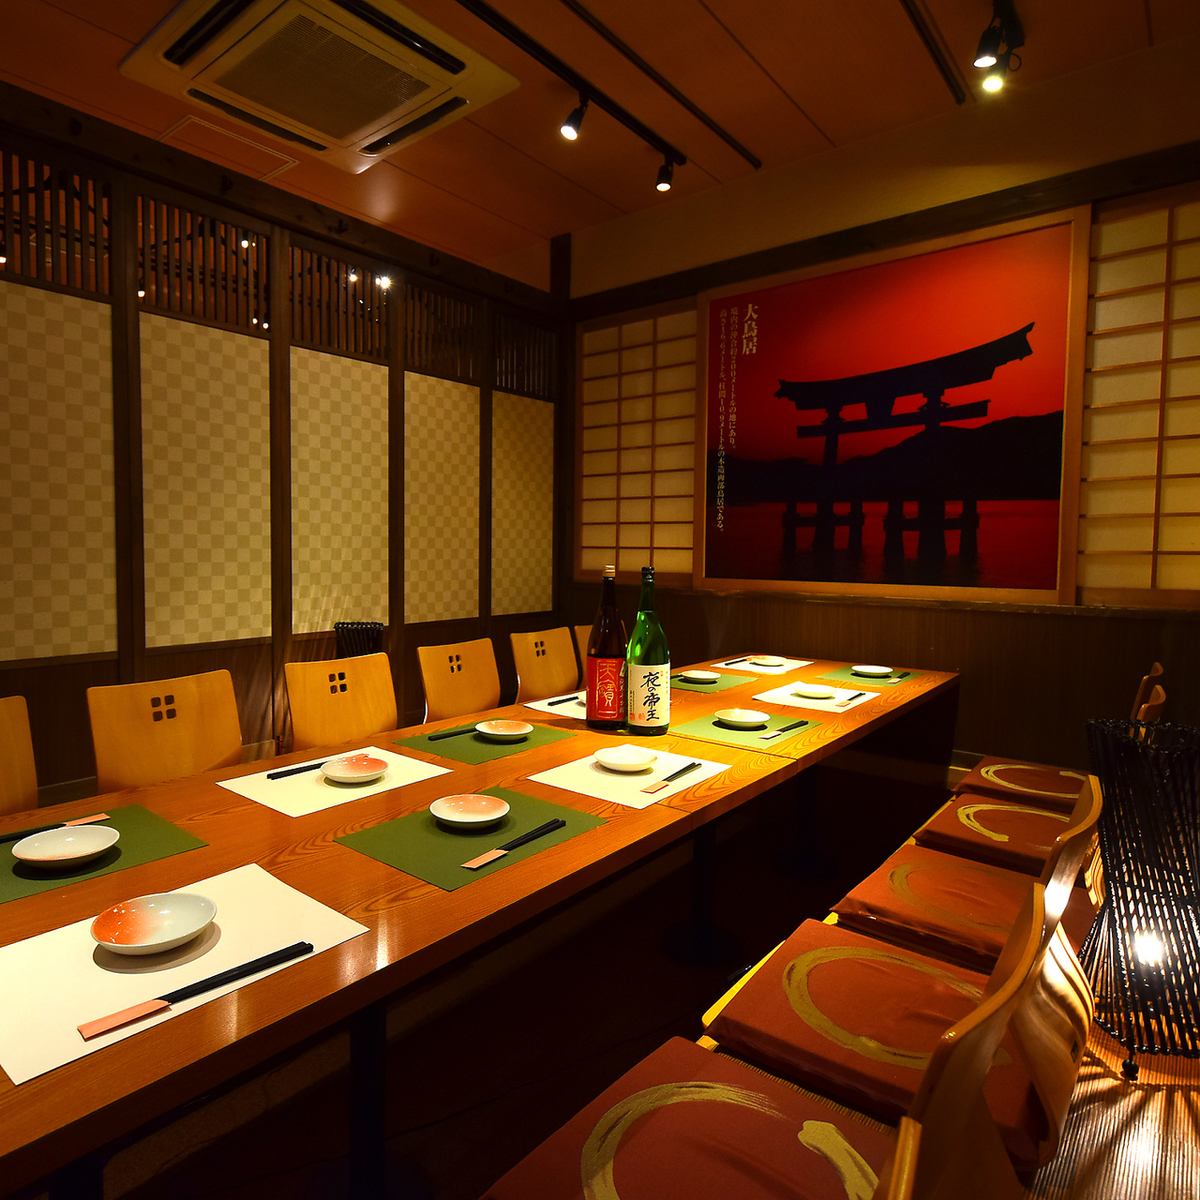 A private room for adults with a motif of Itsukushima Shrine.